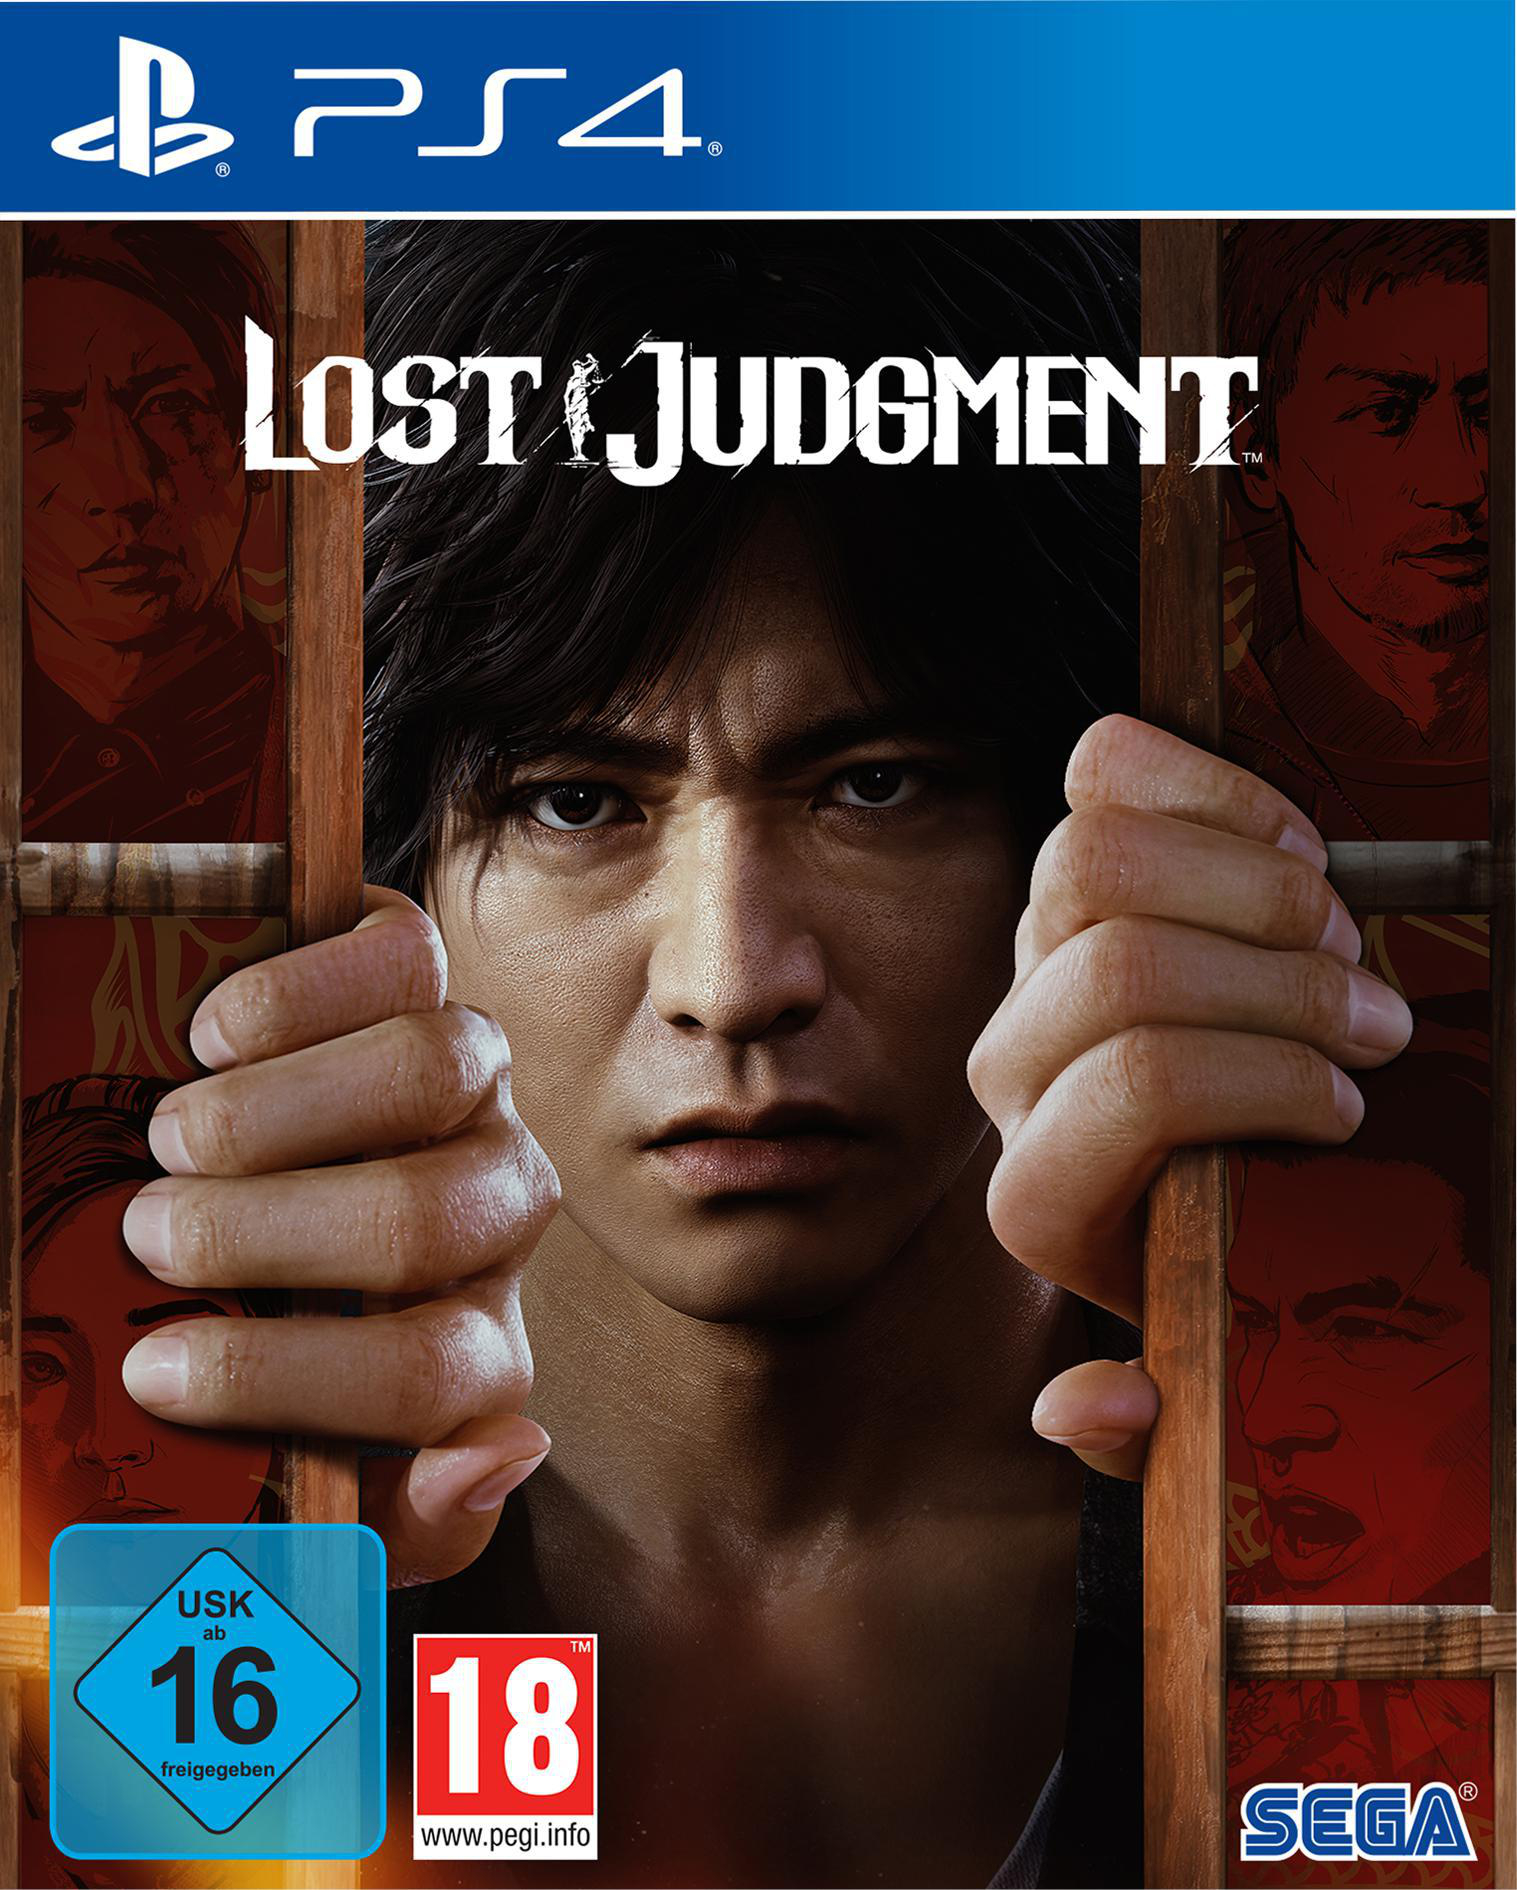 LOST 4] - JUDGMENT PS4 [PlayStation